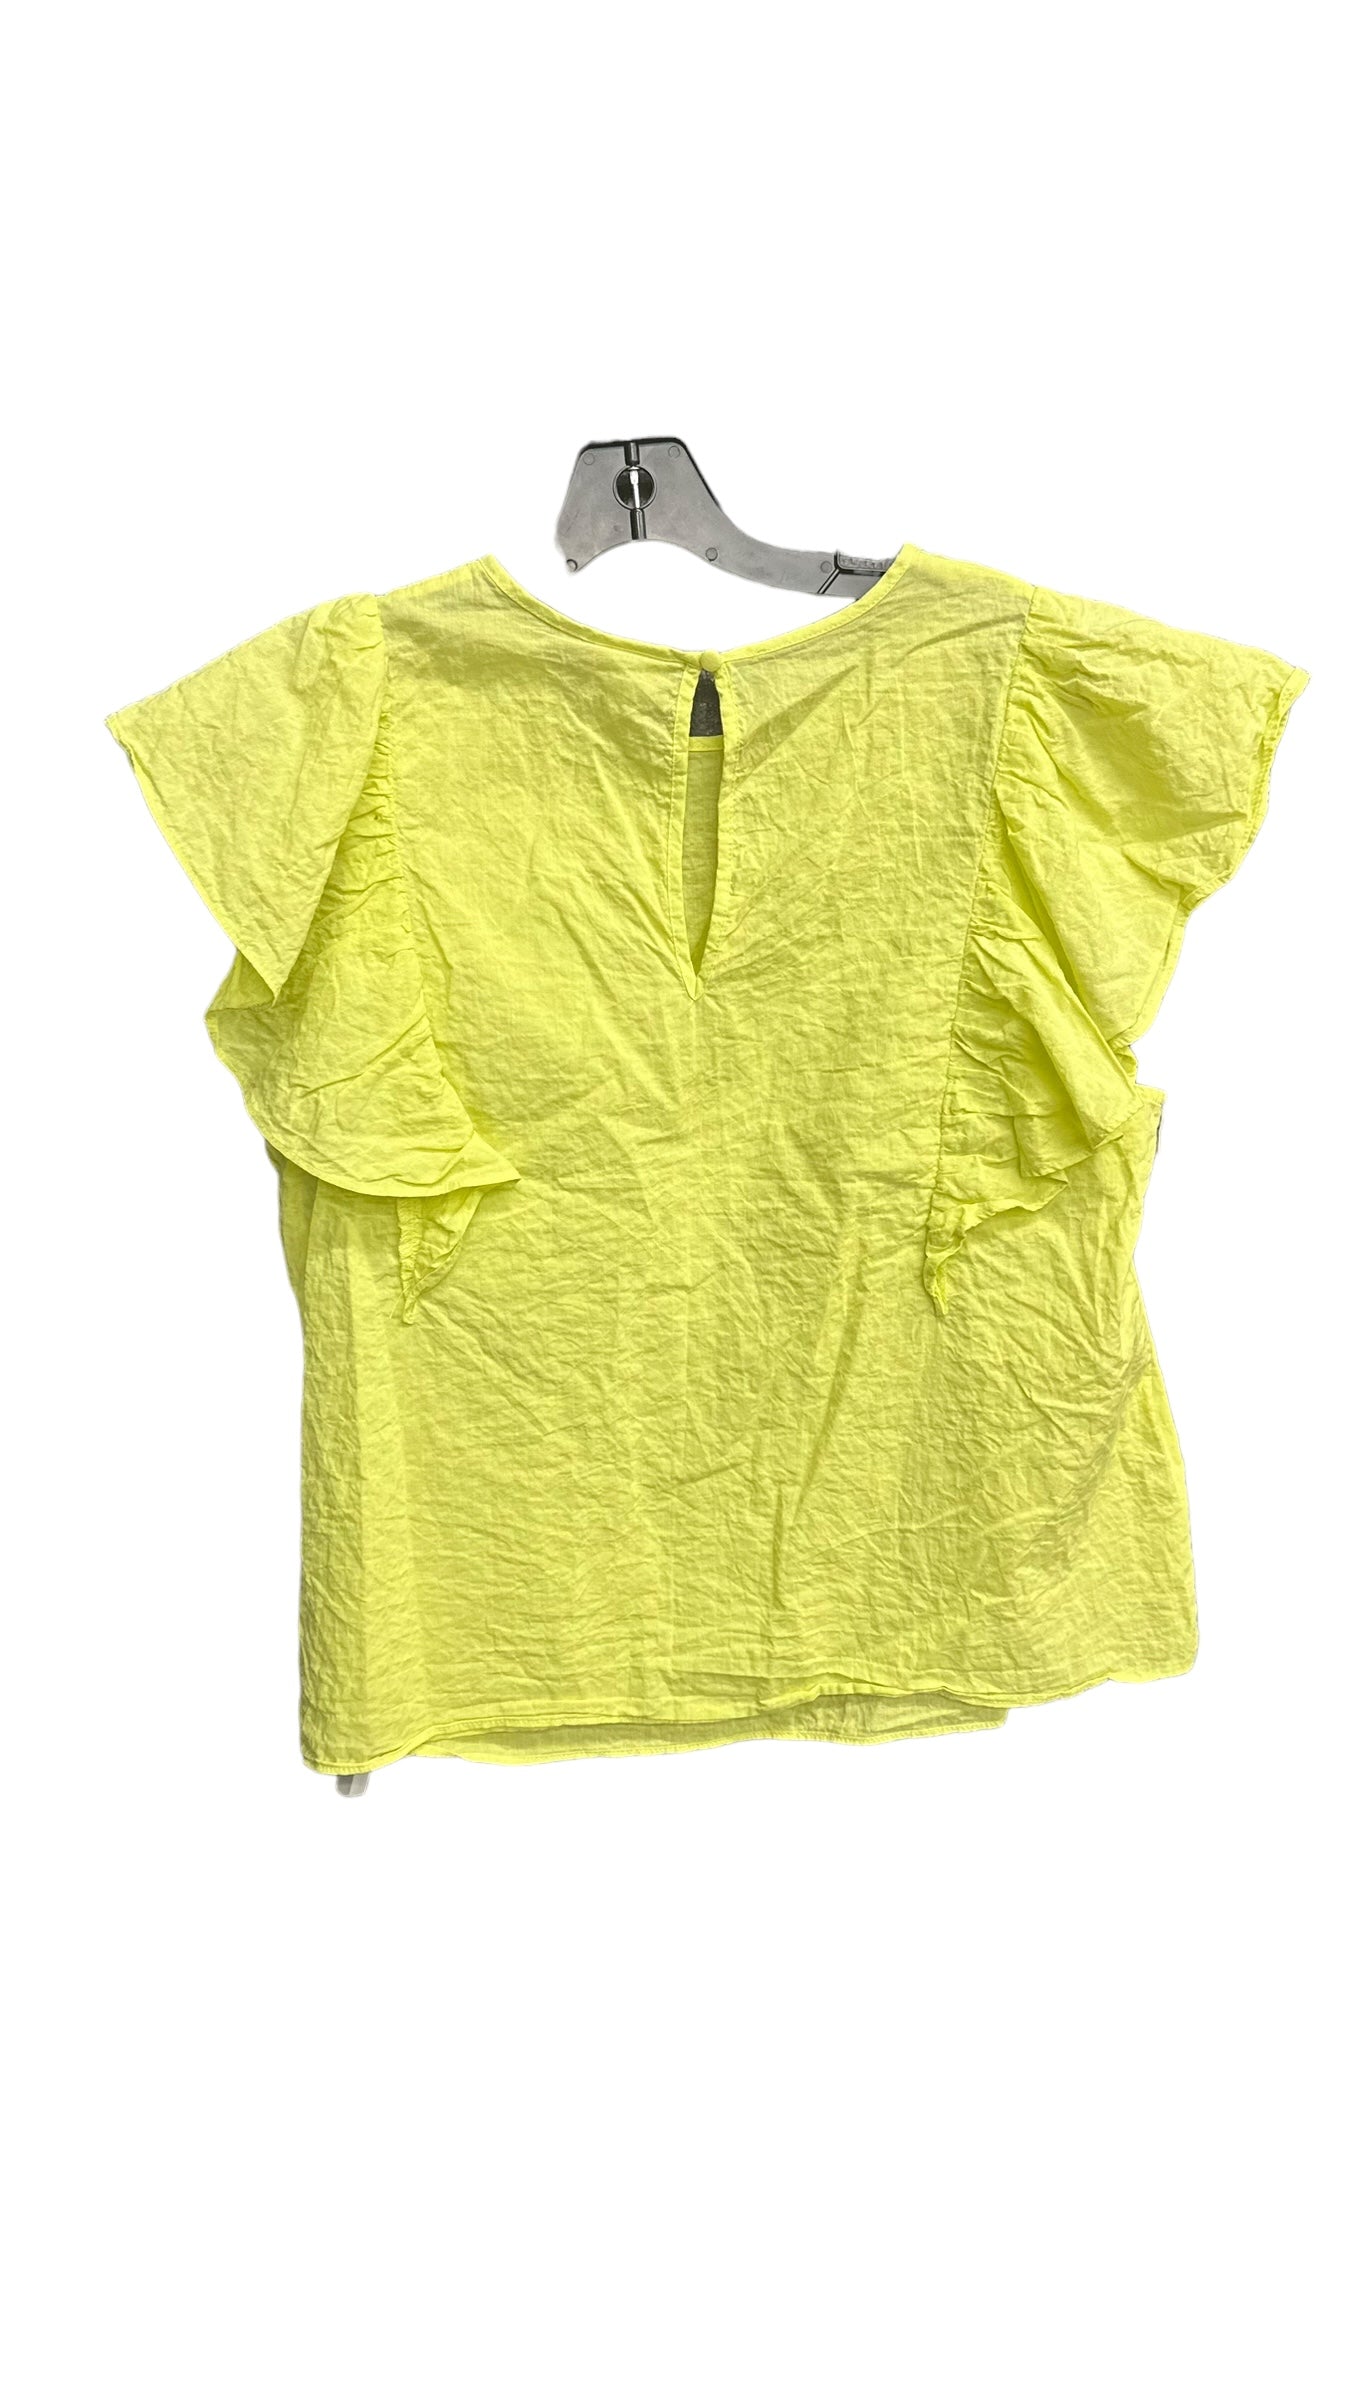 Yellow Top Short Sleeve A New Day, Size Xl